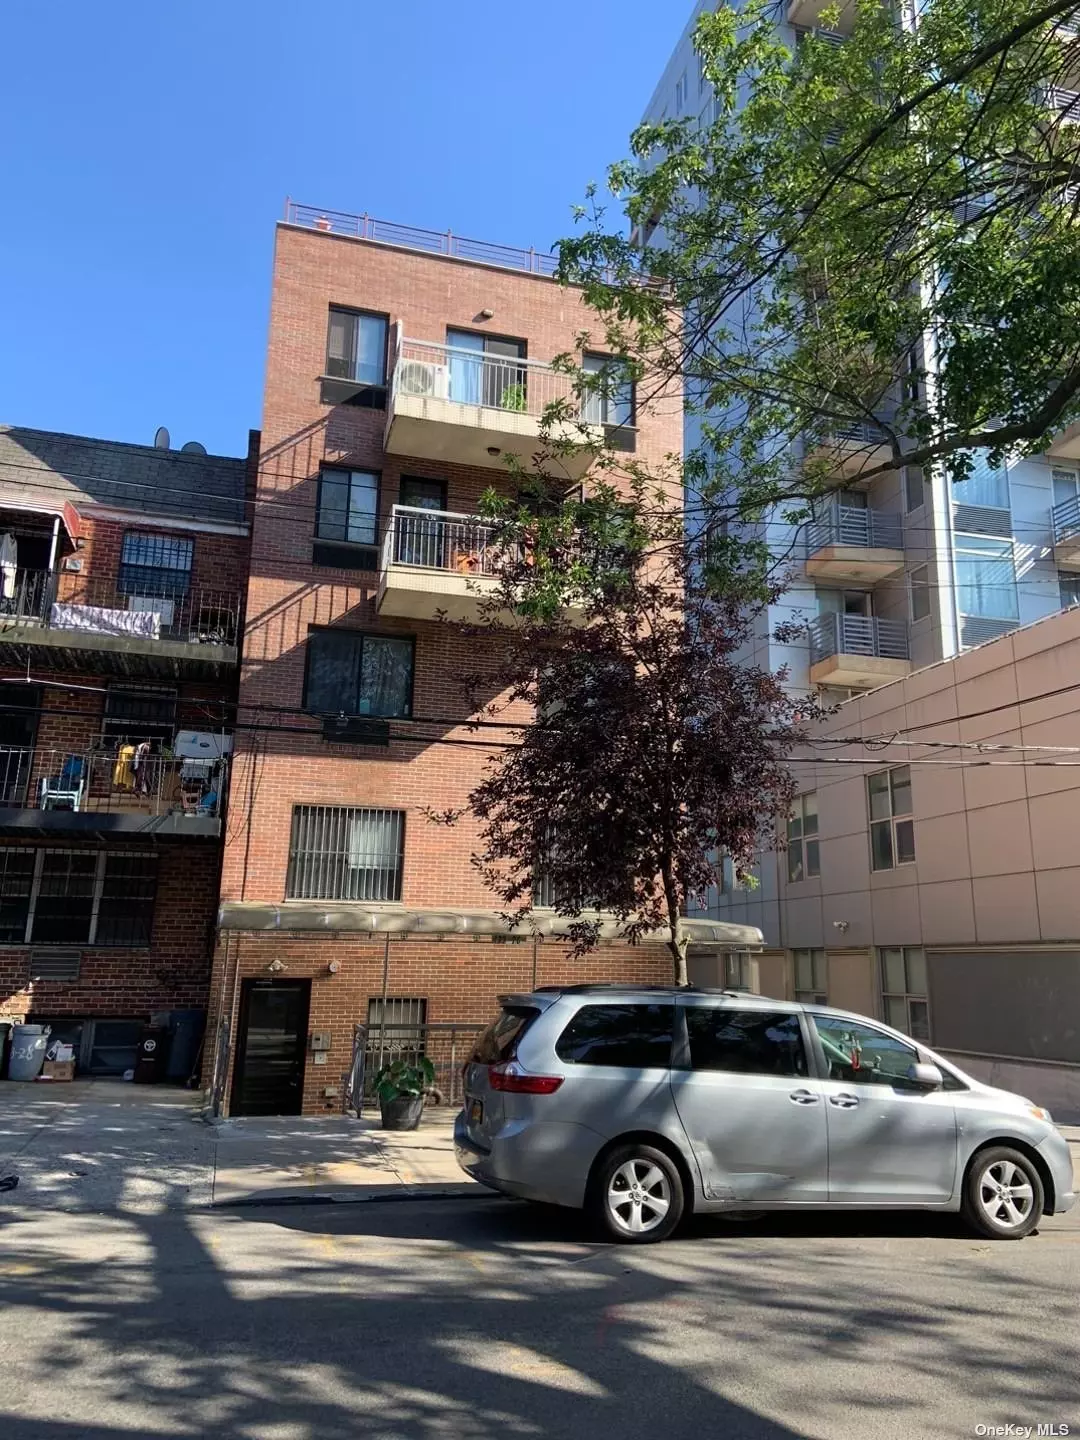 Location! in the heart of Flushing, one block away from Main st, close super market, restaurant, banks, and close to No.7 train station. there are 4 windows in the unit. low maintenance. still low taxes. in good condition. buyers should verify all information during showing.